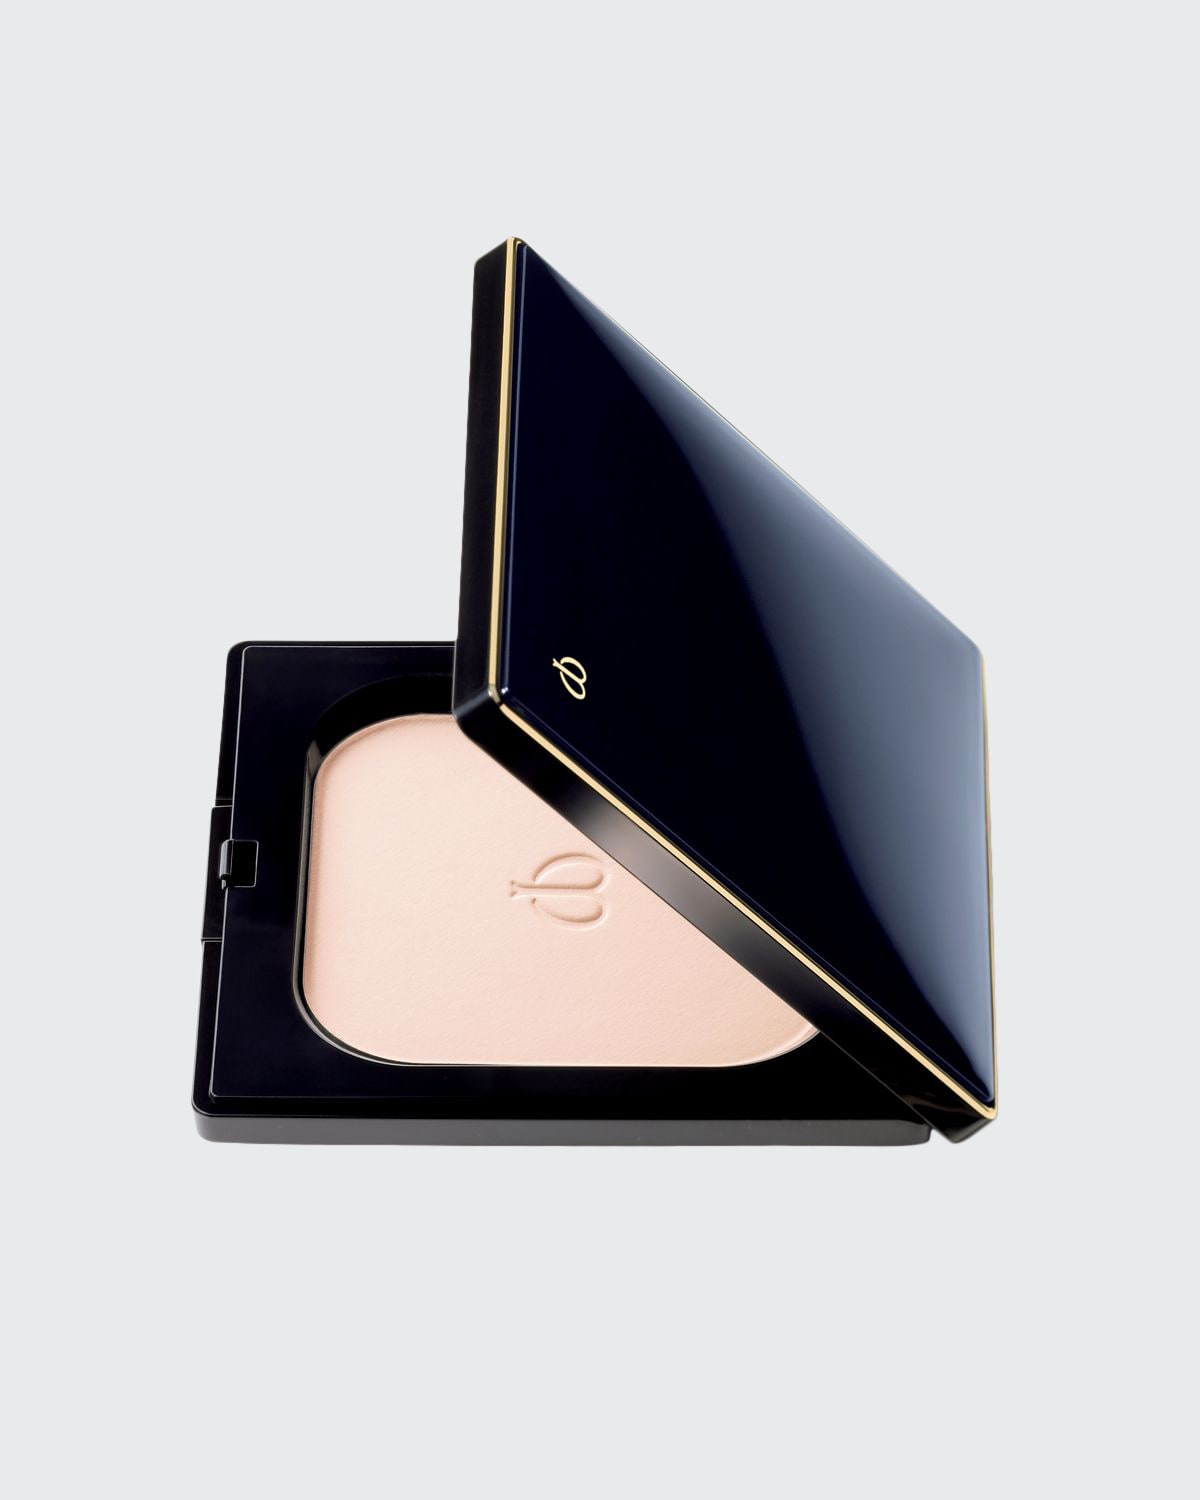 Cle de Peau Beaute Refining Pressed Powder with Case, Refill & Puff